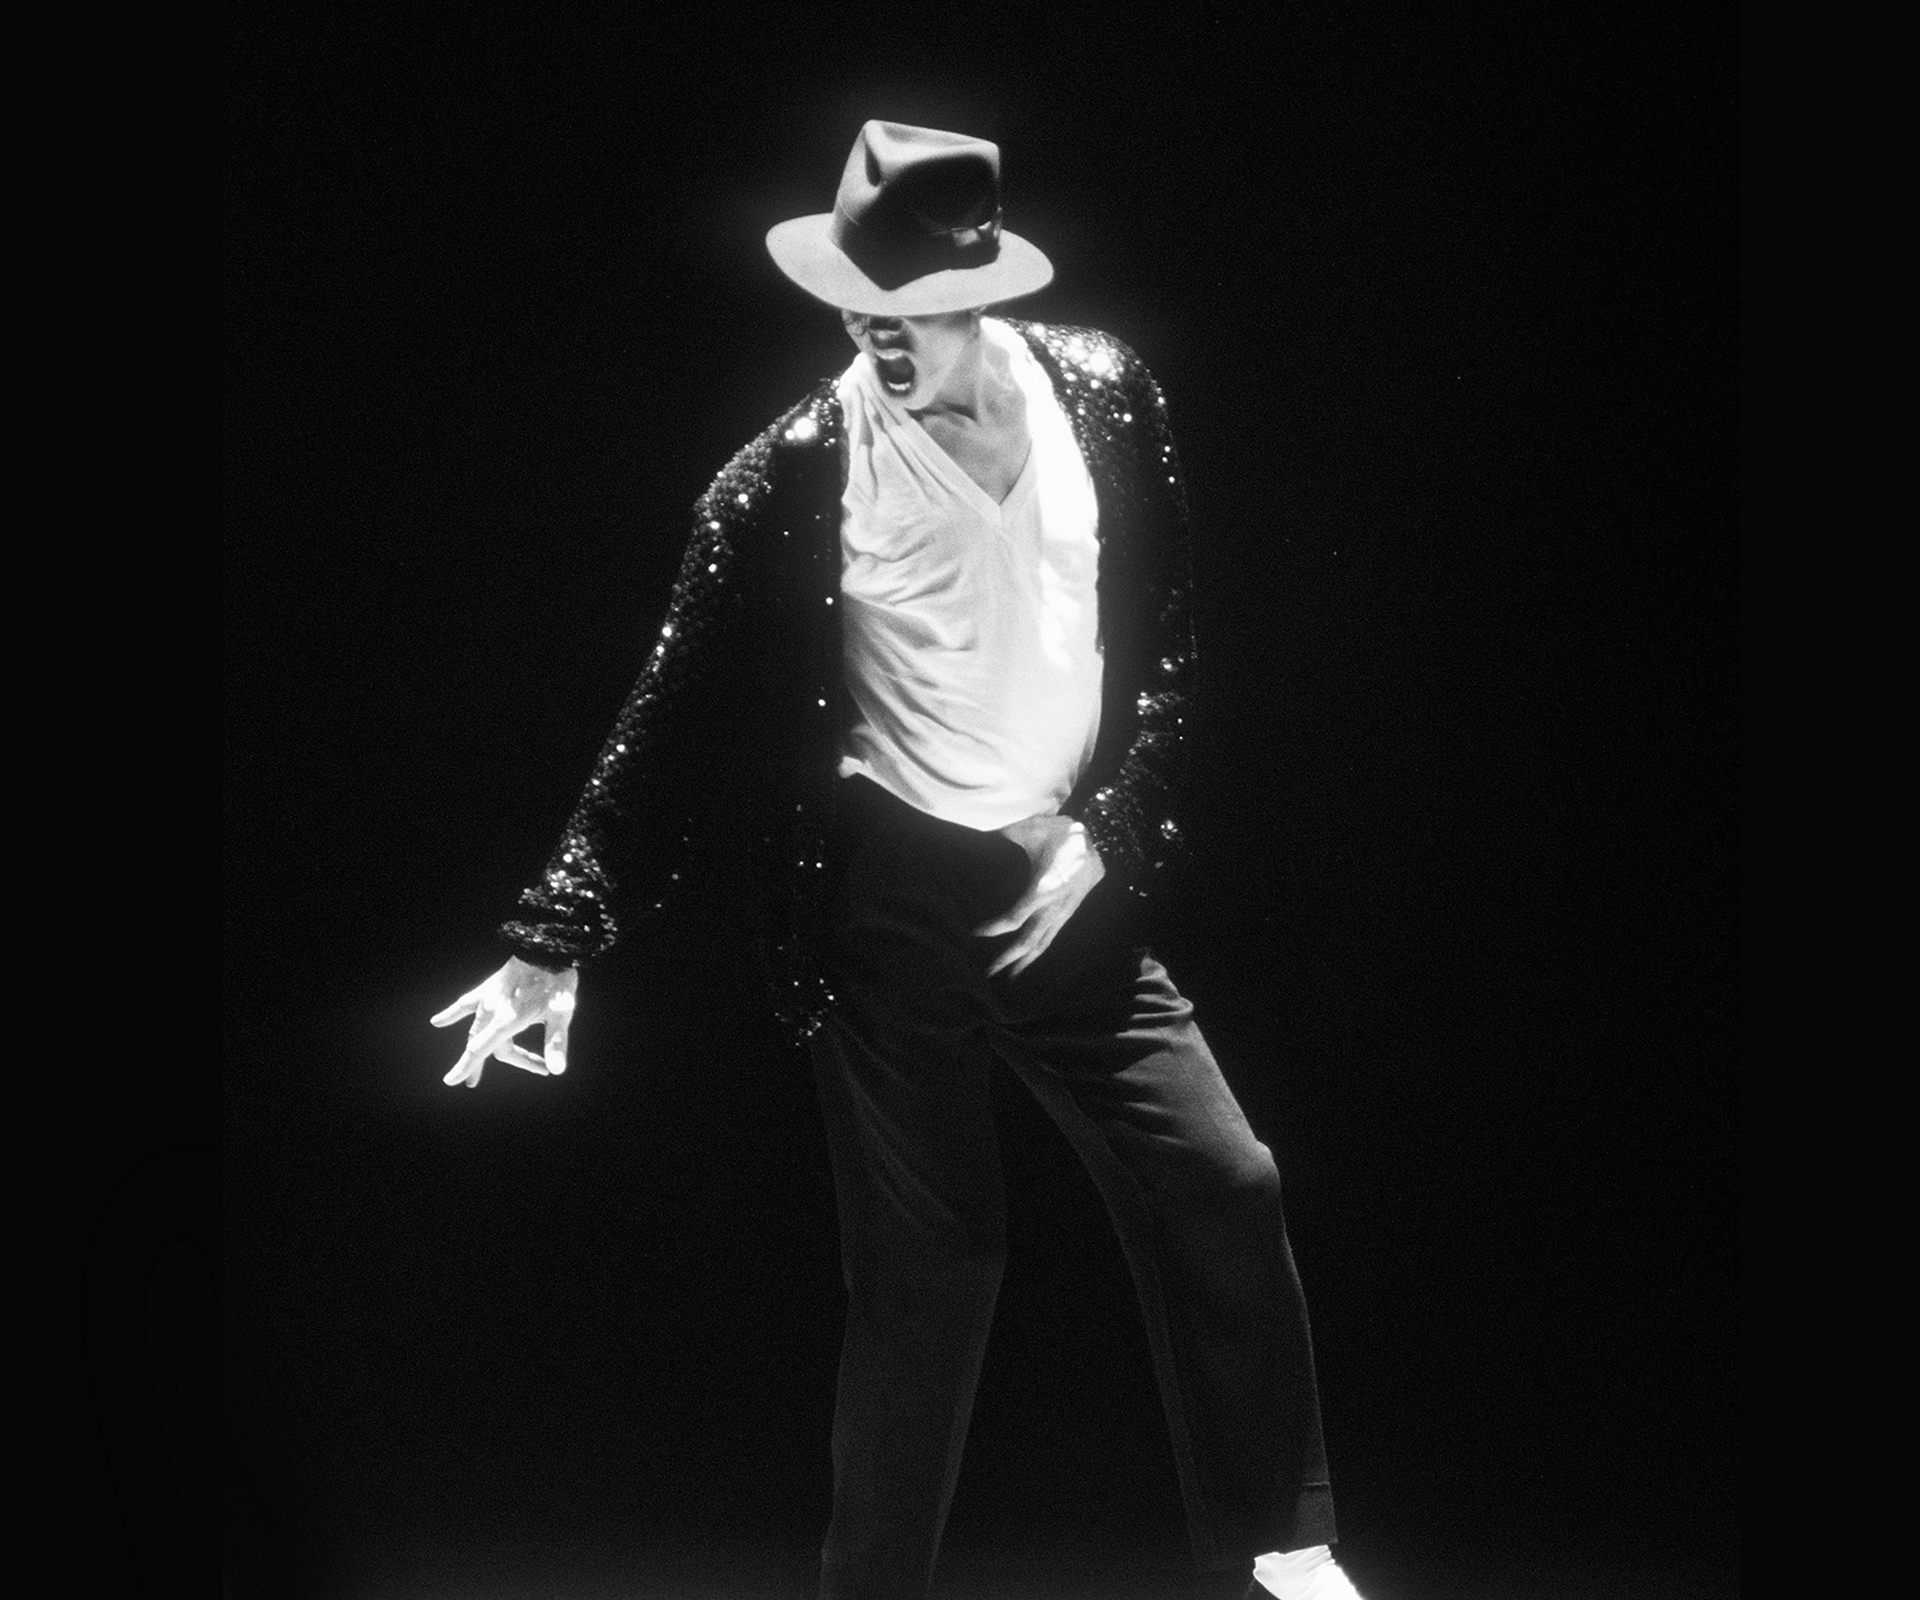 Happy birthday to the King of Pop!